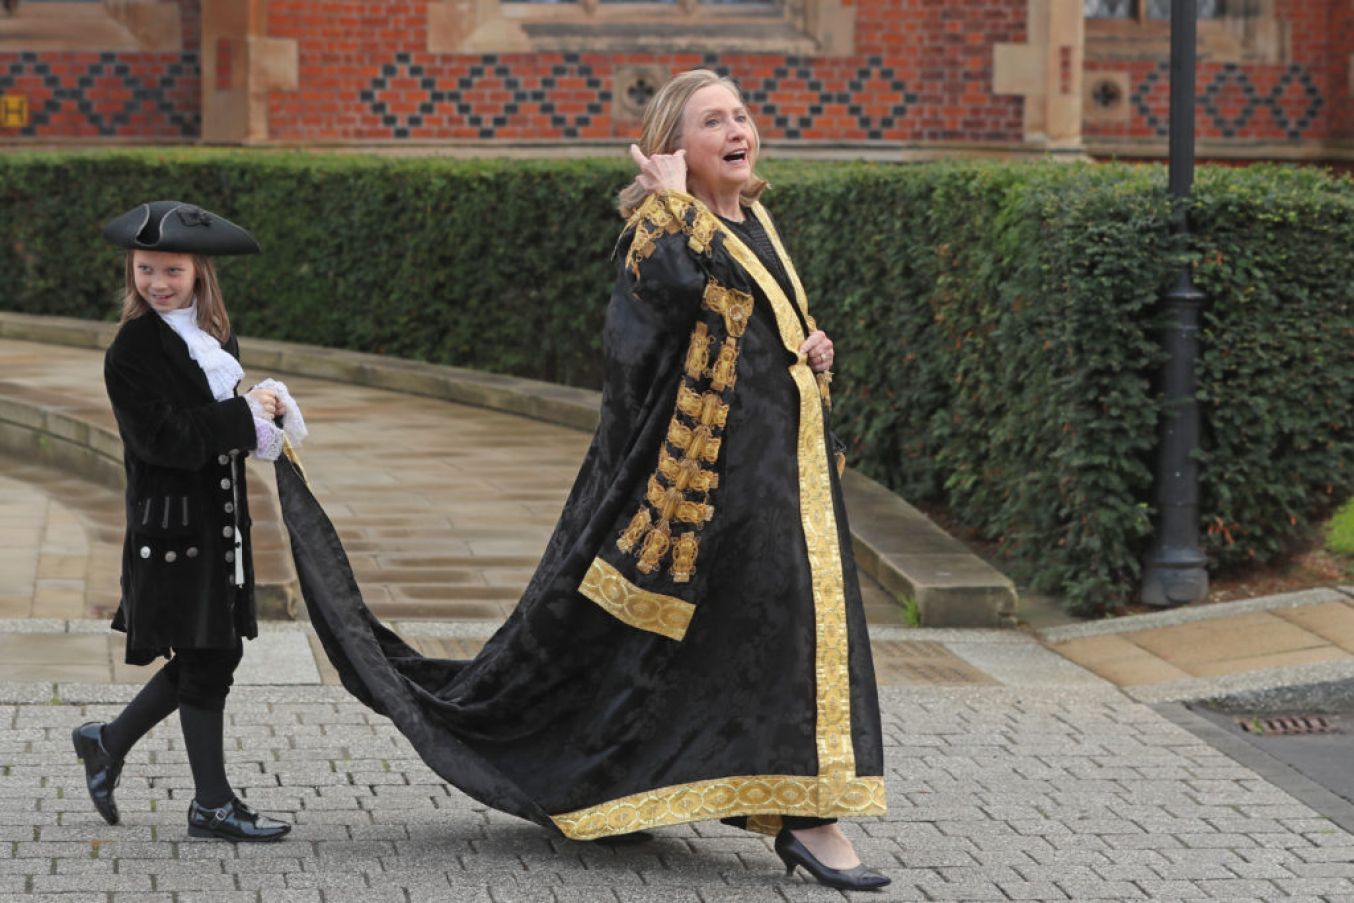 The Former Us Secretary Of State Hillary Clinton Is Installed As The Chancellor Of Queen's University Belfast. Photo: Pa